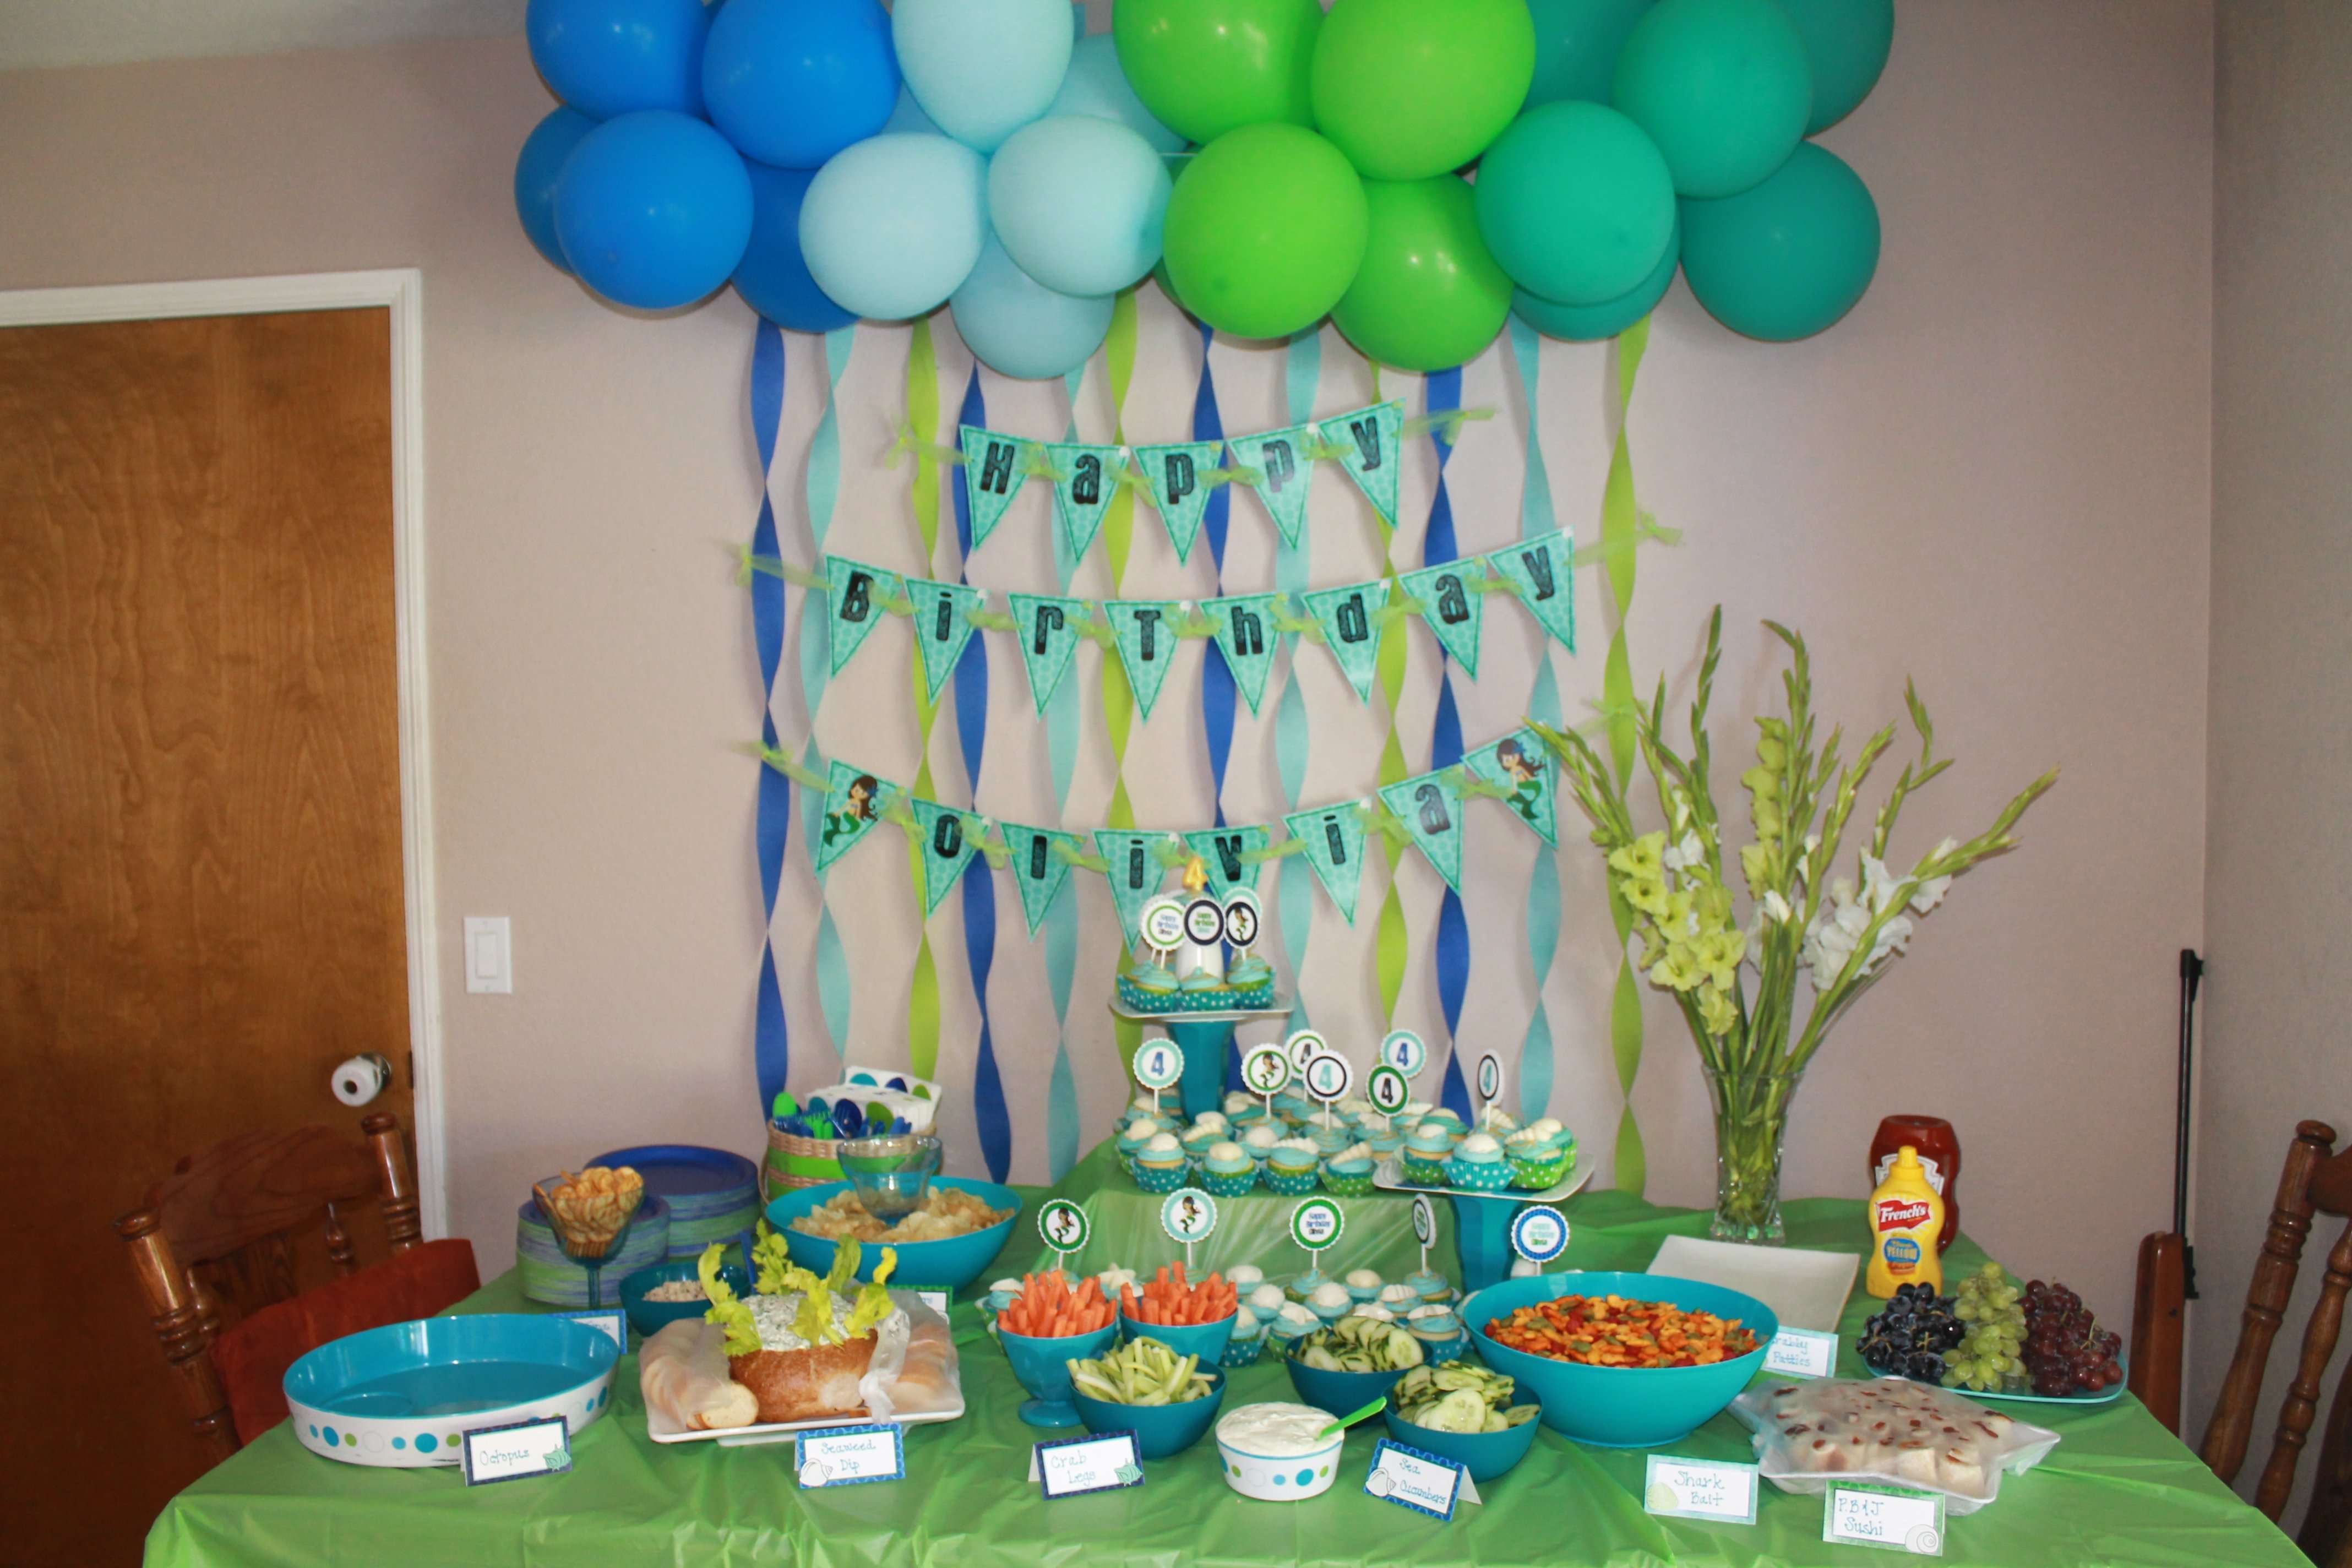 10 Cute Ideas For Birthday Parties At Home party planning tips for organizing childrens birthday parties 2022